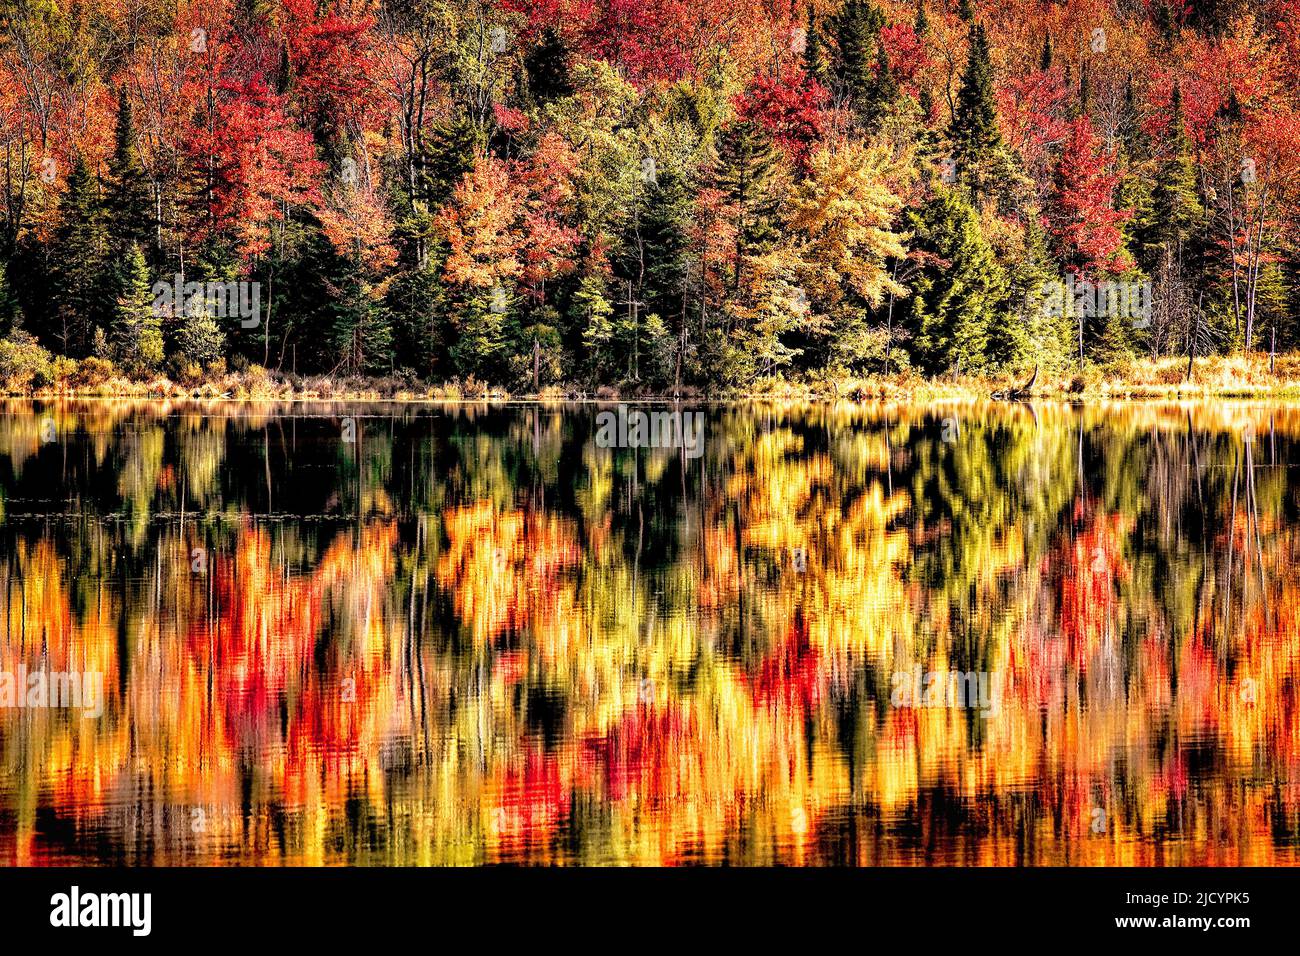 The forest around Long Pond reflects in the quiet waters in Vermont. Stock Photo